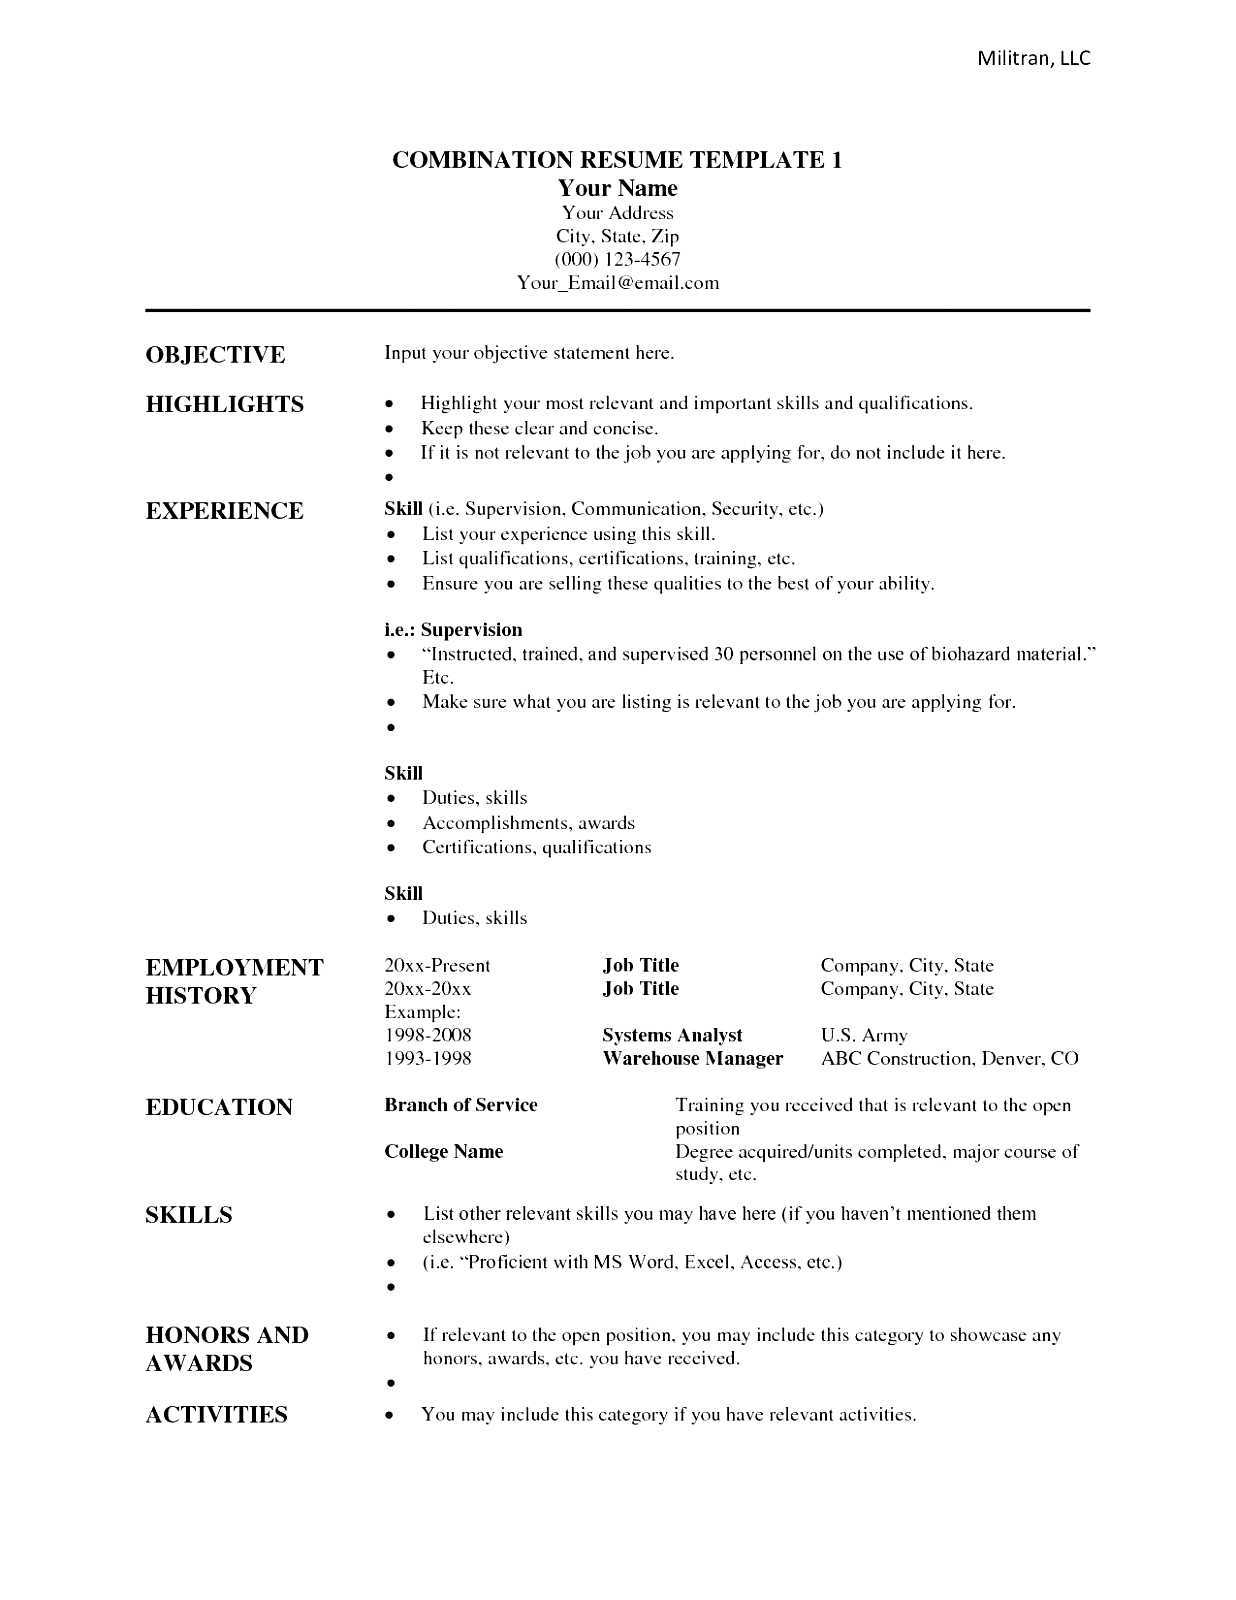 Functional Resume Template Google Docs Cv Mila Friedman Intended For Combination Resume Template Word